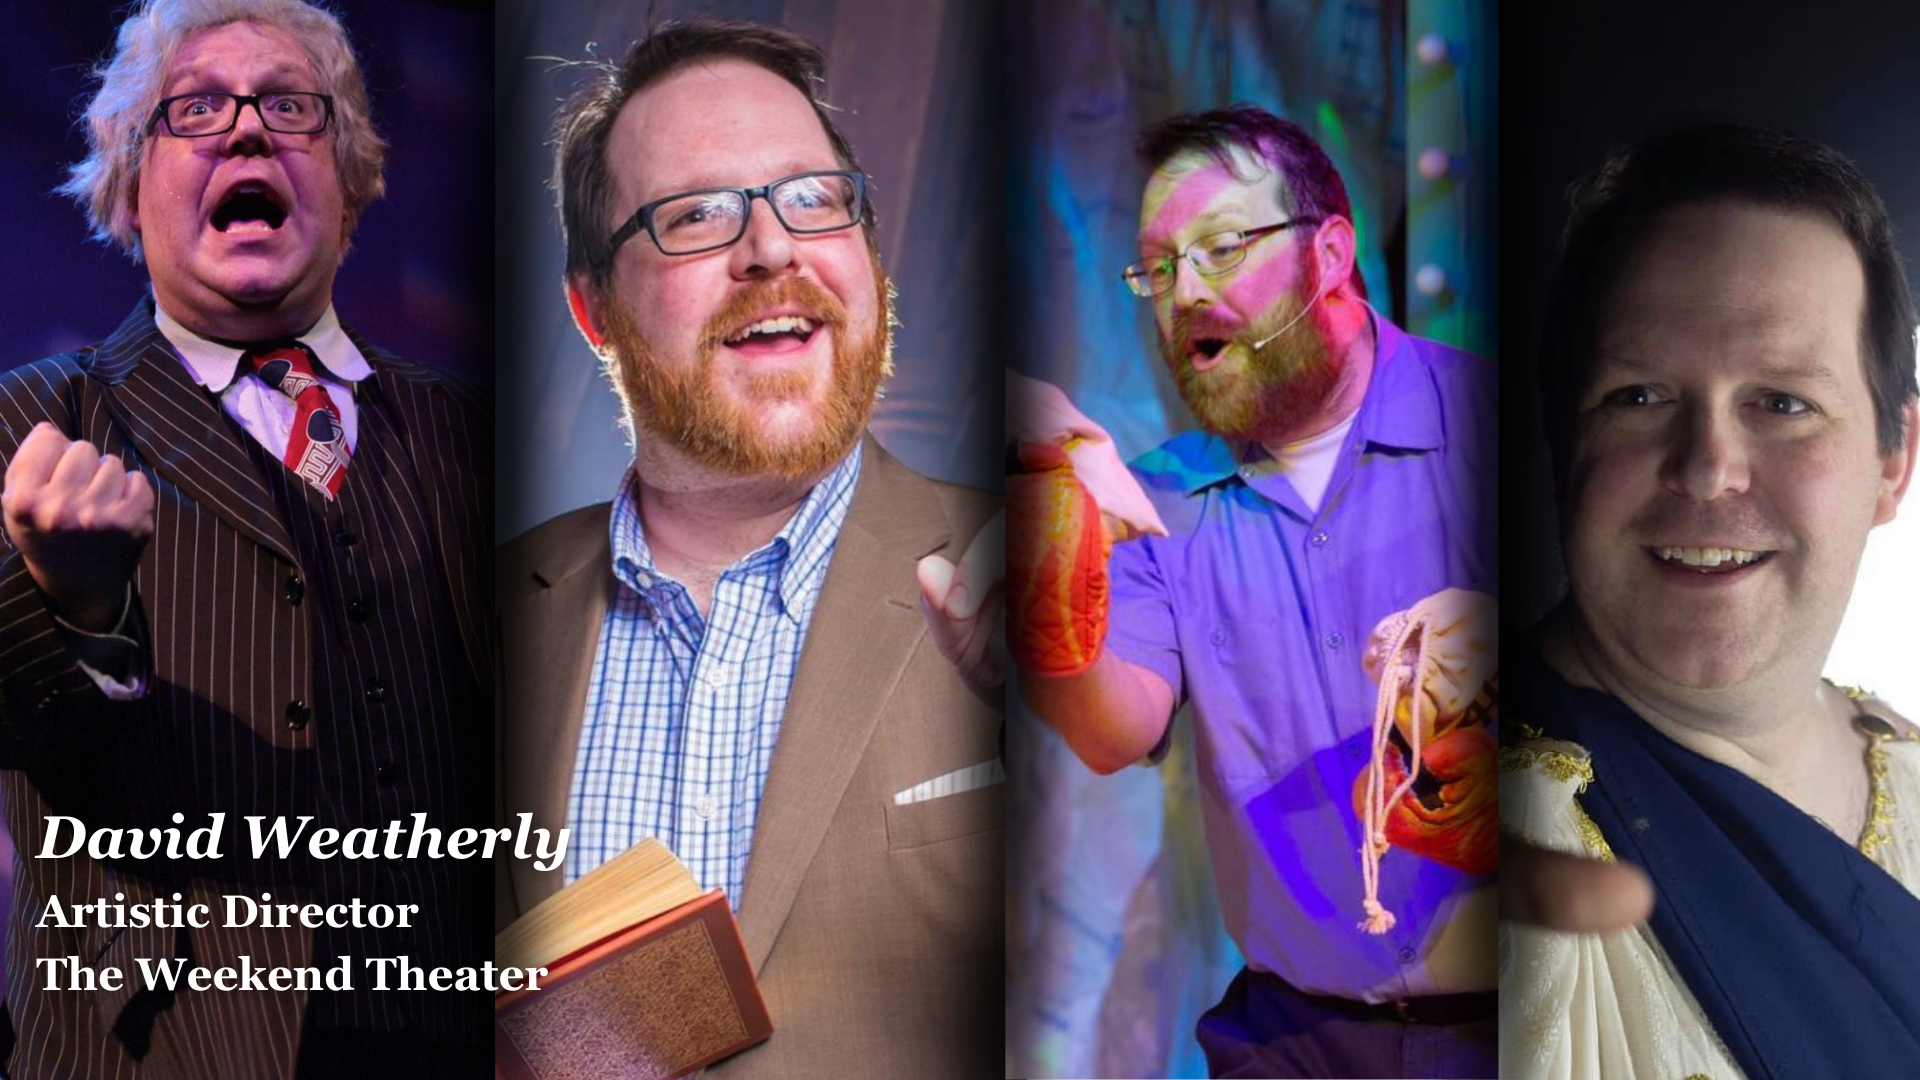 The Weekend Theater Announces New Artistic Director!